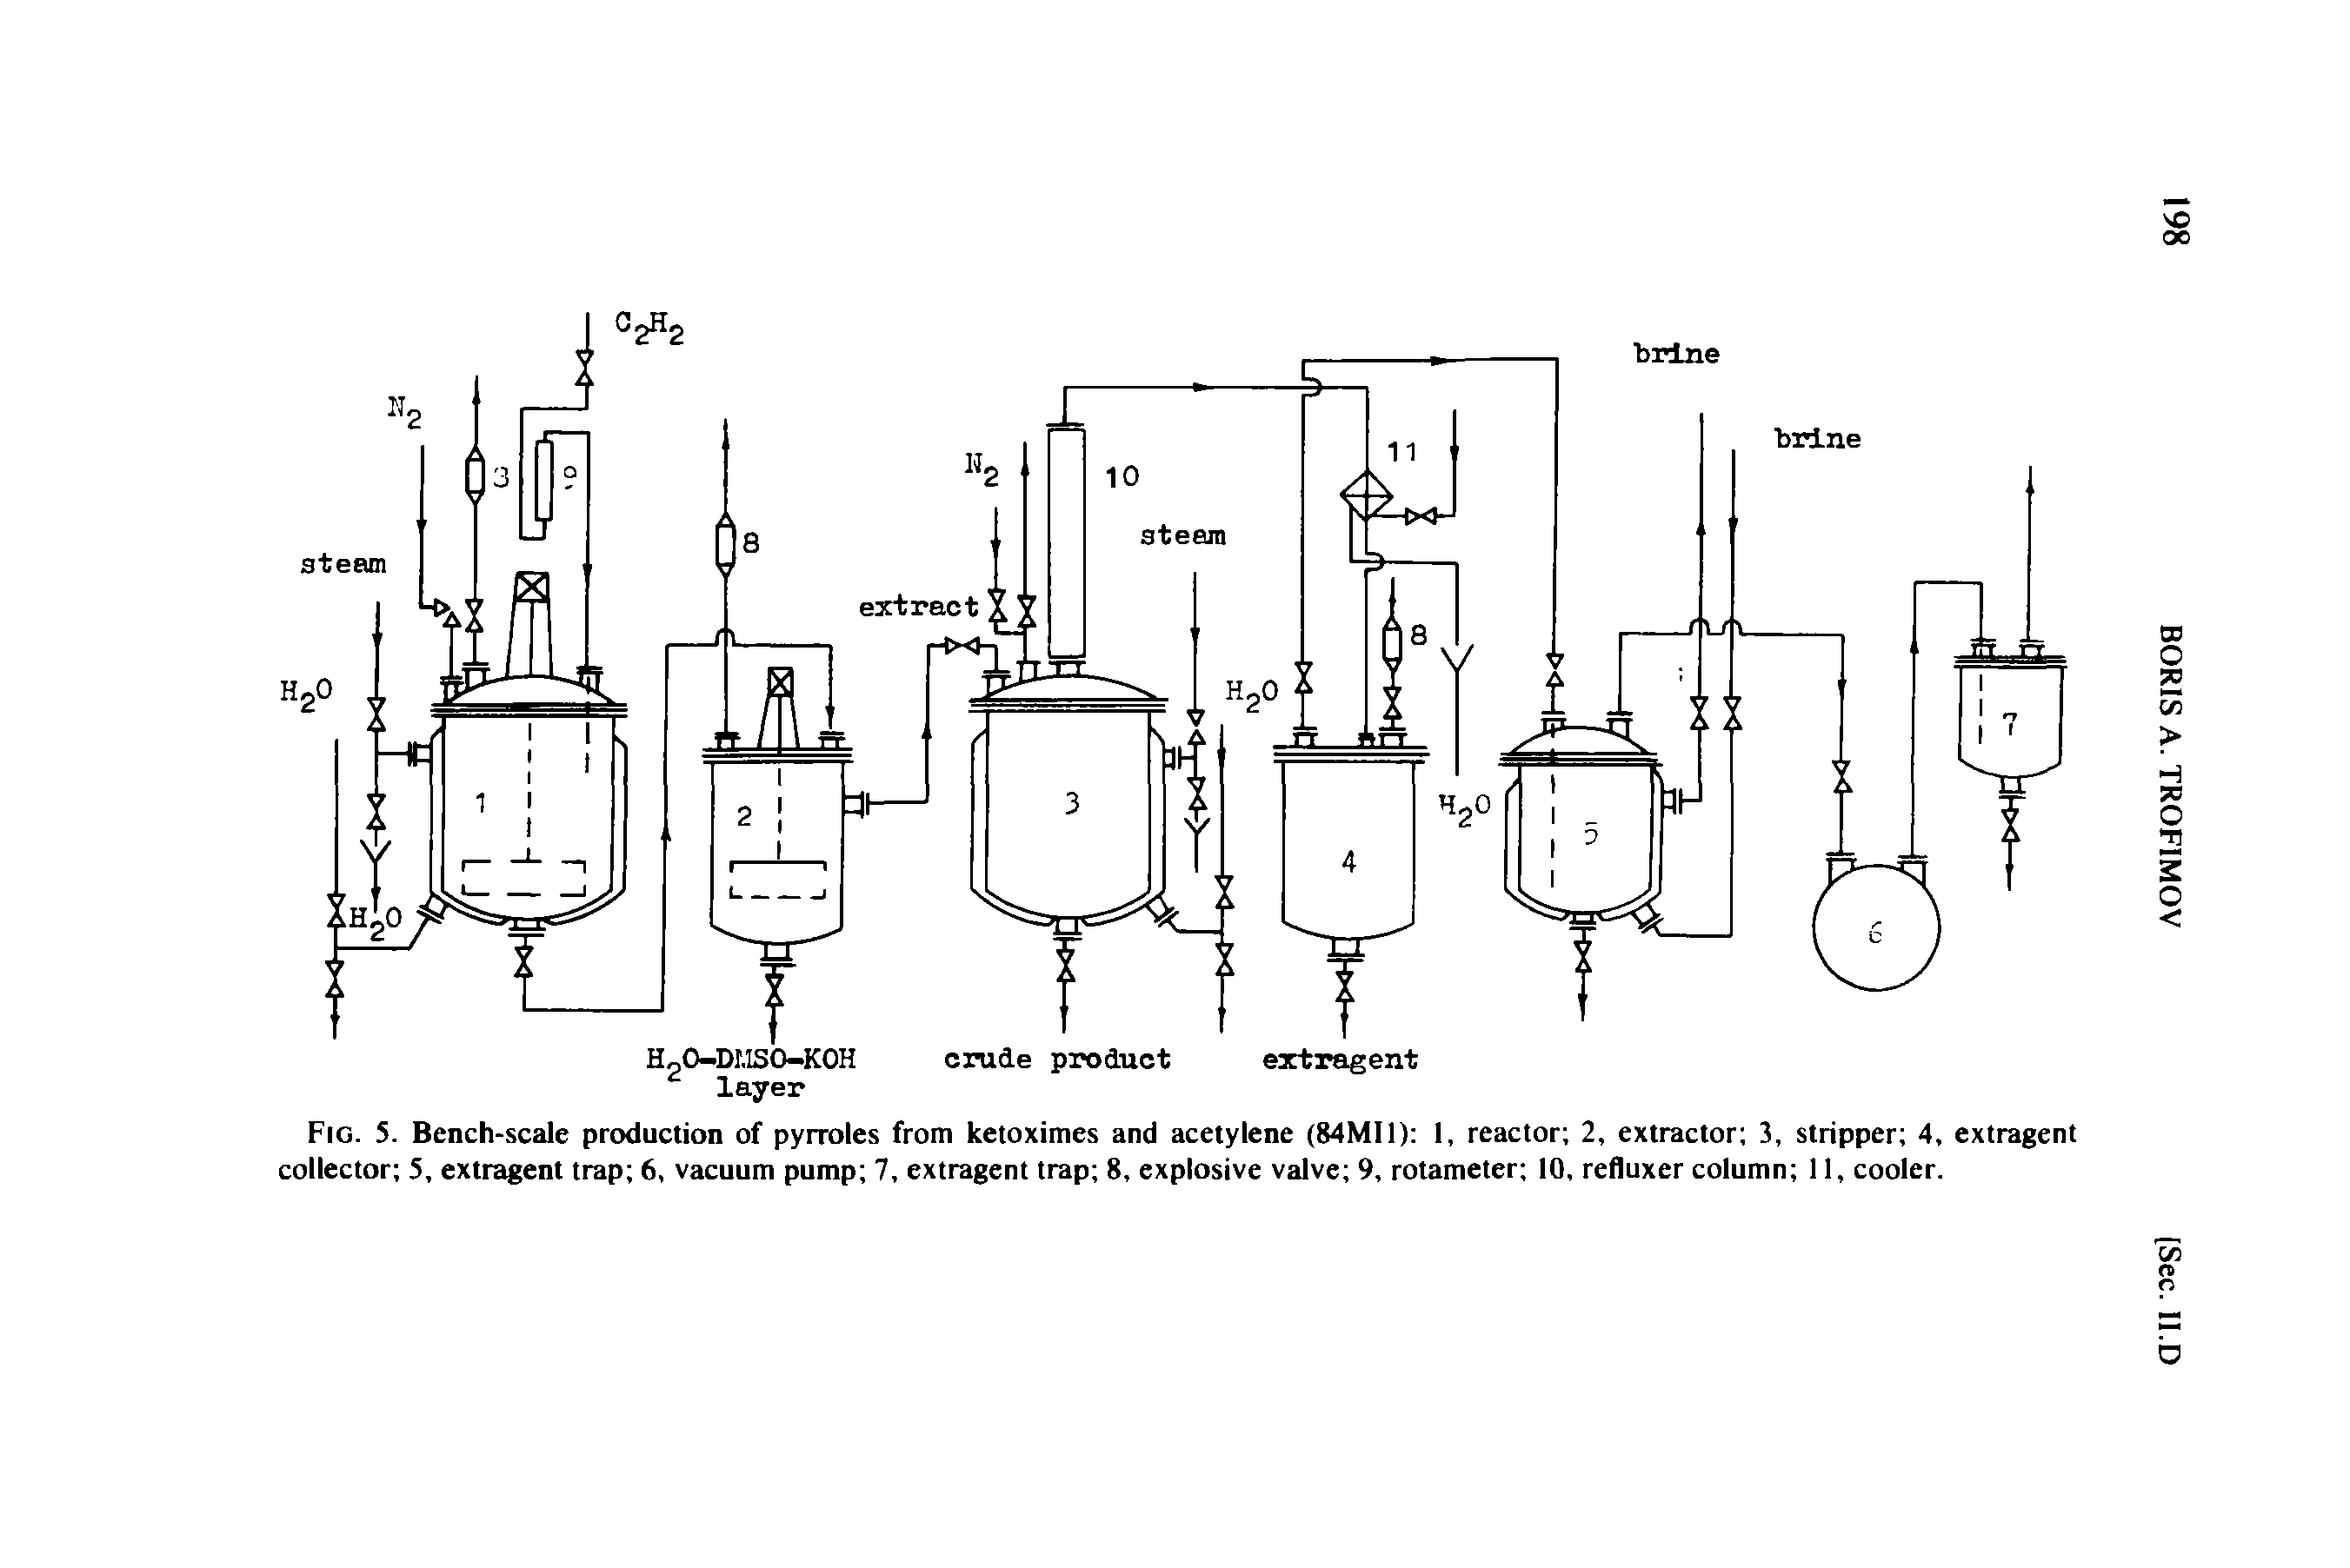 Fig. 5. Bench-scale production of pyrroles from ketoximes and acetylene (84M11) 1, reactor 2, extractor 3, stripper 4, extragent collector 5, extragent trap 6, vacuum pump 7, extragent trap 8, explosive valve 9, rotameter 10, refluxer column 11, cooler.